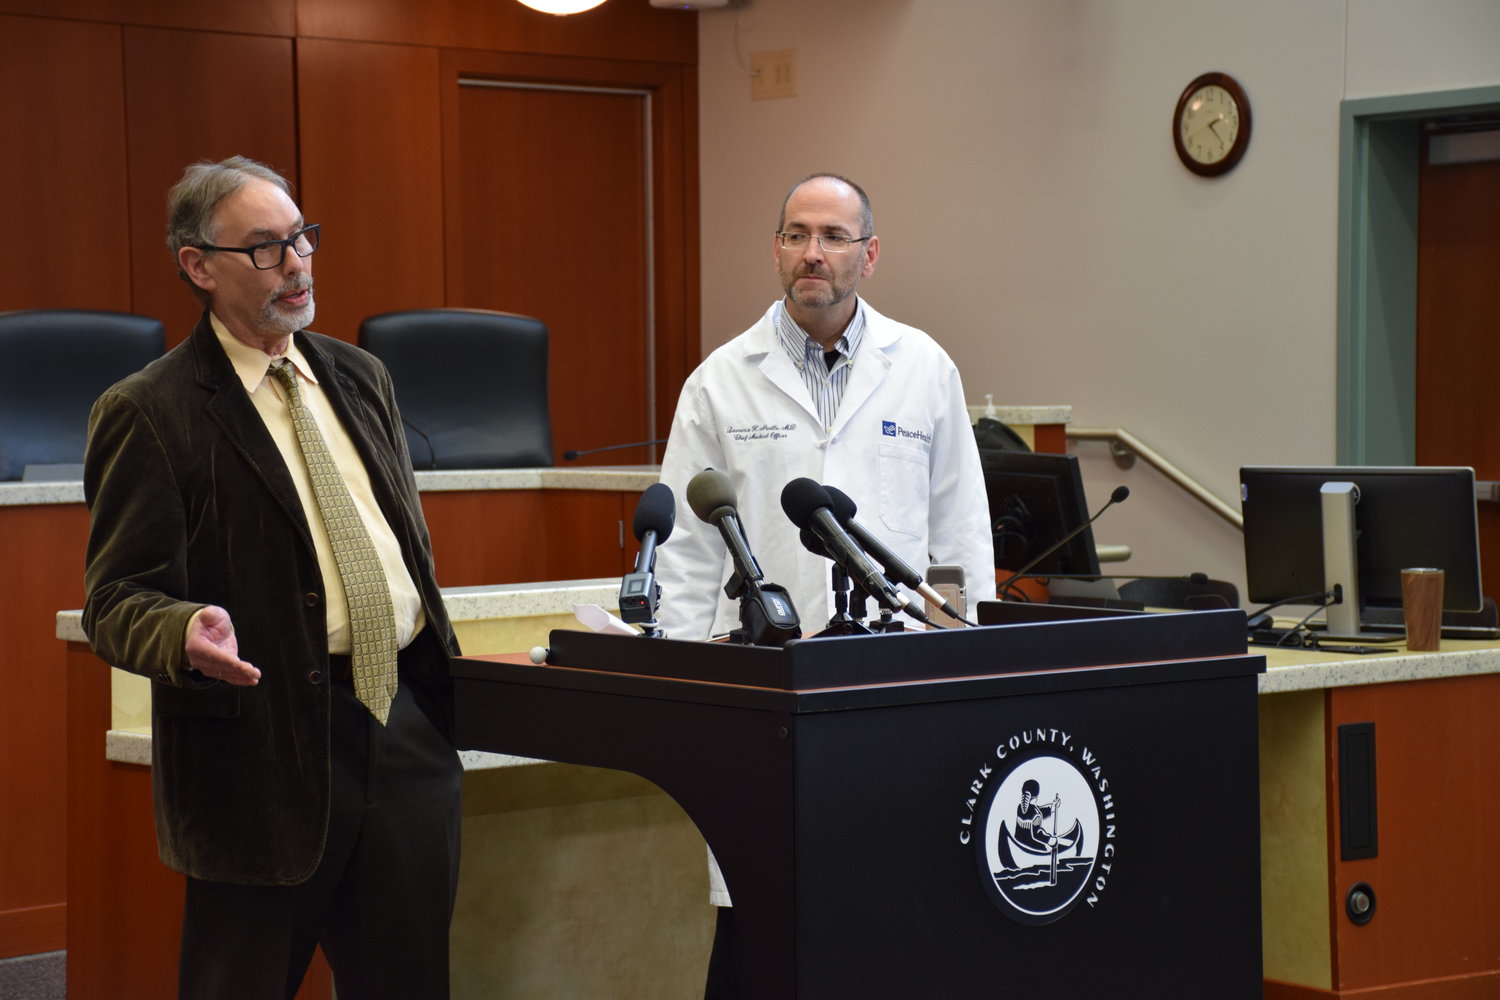 FILE PHOTO: Clark County Public Health Director Alan Melnick, left, and PeaceHealth Southwest Medical Center Chief Medical Officer Lawrence Neville, address media during a press conference March 13 on two new cases of COVID-19 confirmed in Clark County.